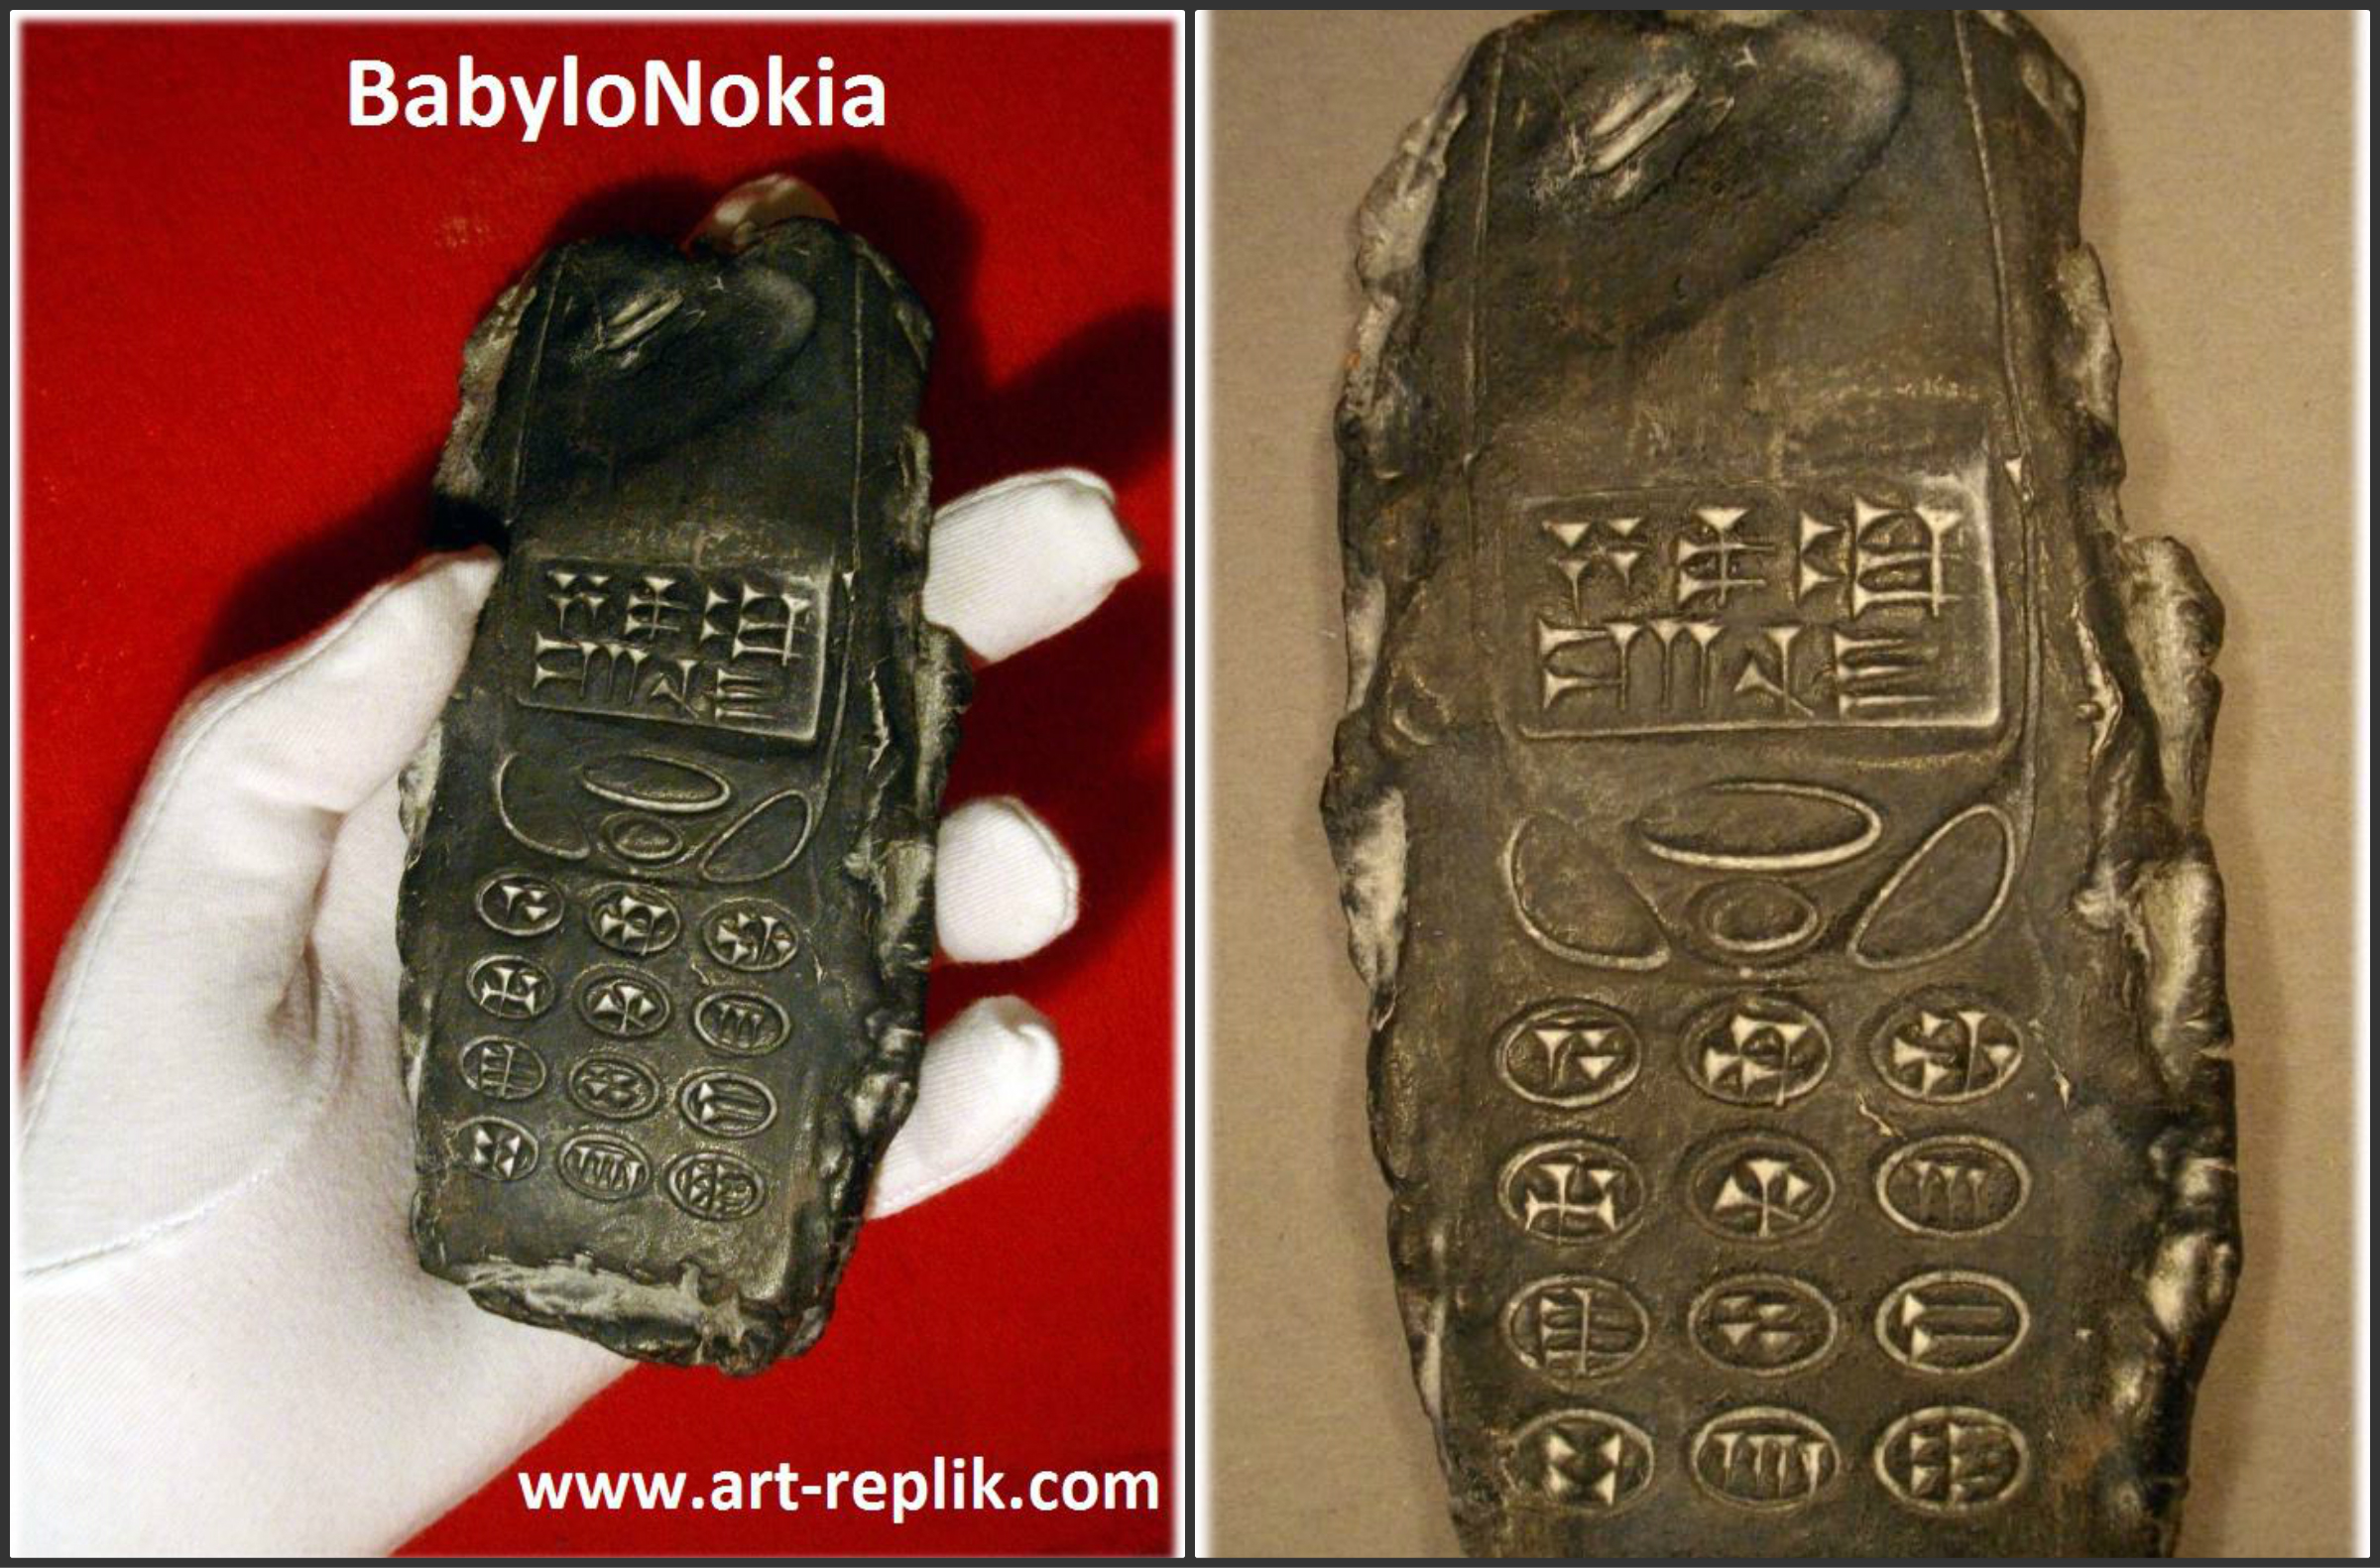 Did Archaeologists Dig Up an 800-Year-Old Alien Cellphone? | Snopes.com